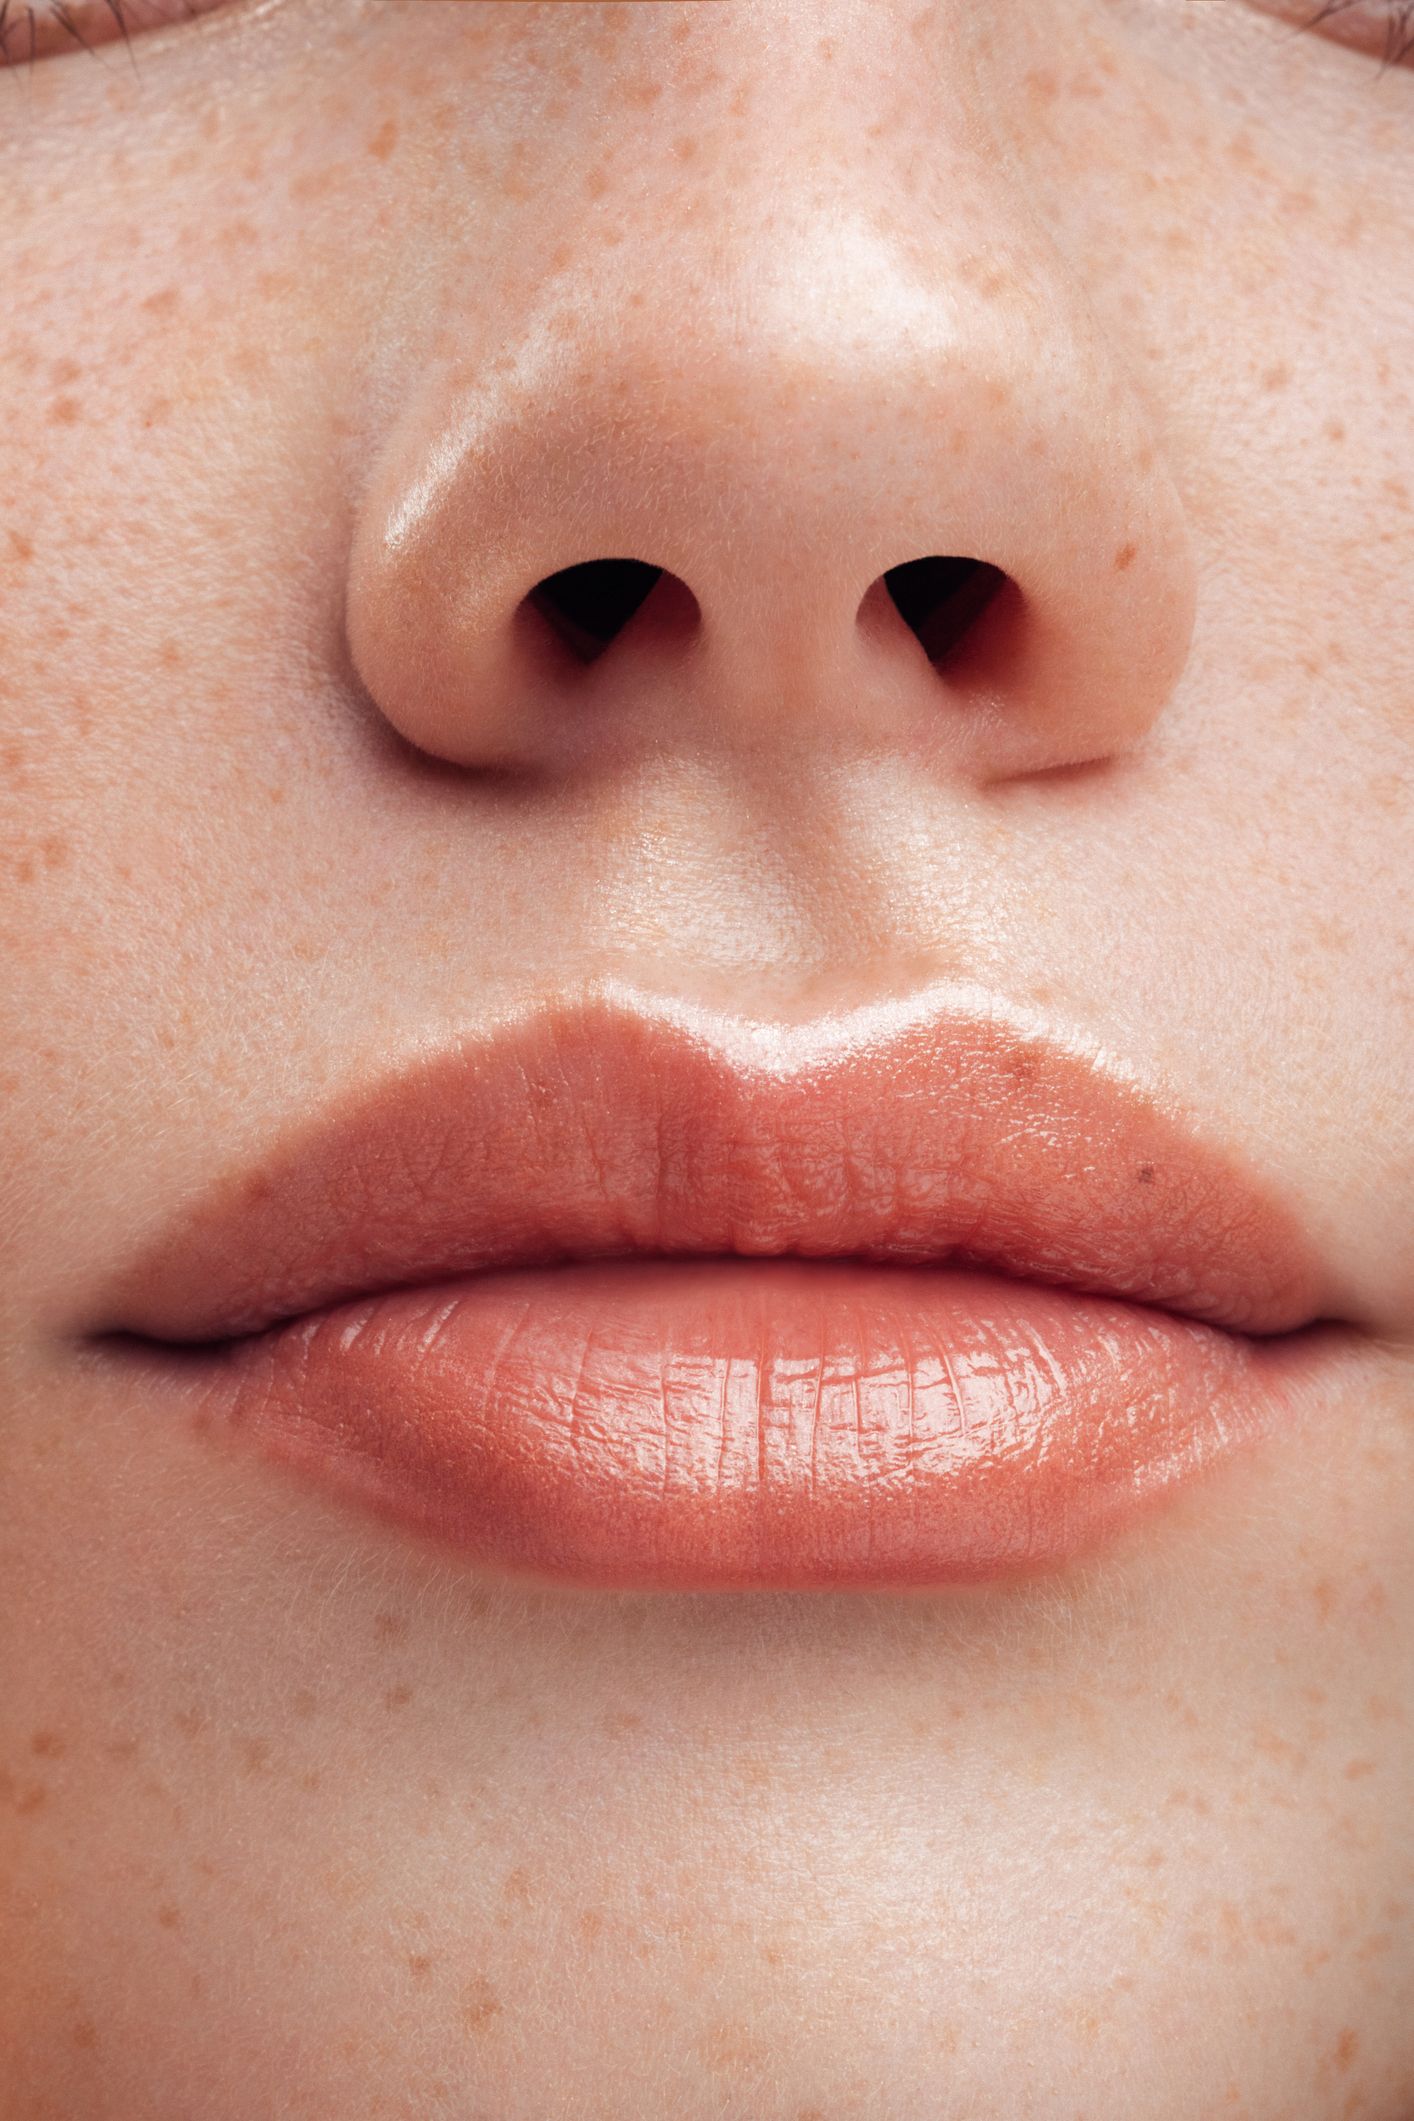 Part of woman's face. Woman's lips and nose. Soft skin.